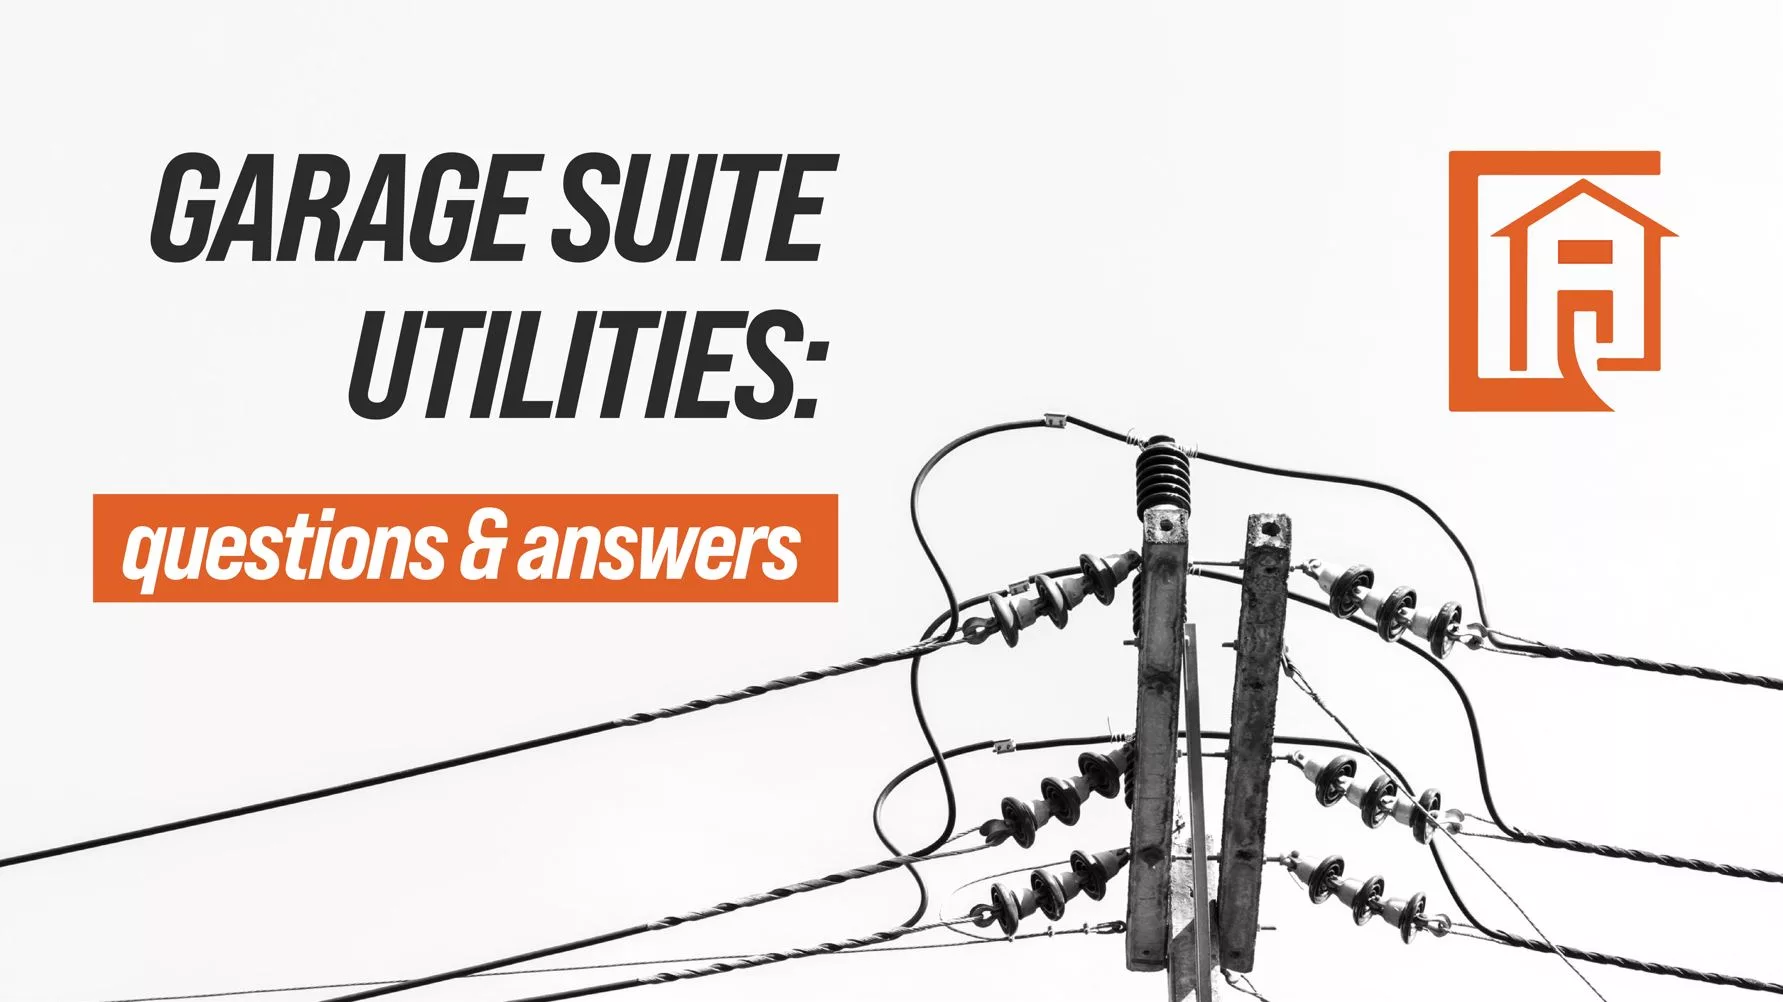 Calgary backyard suite utility connections questions and answers